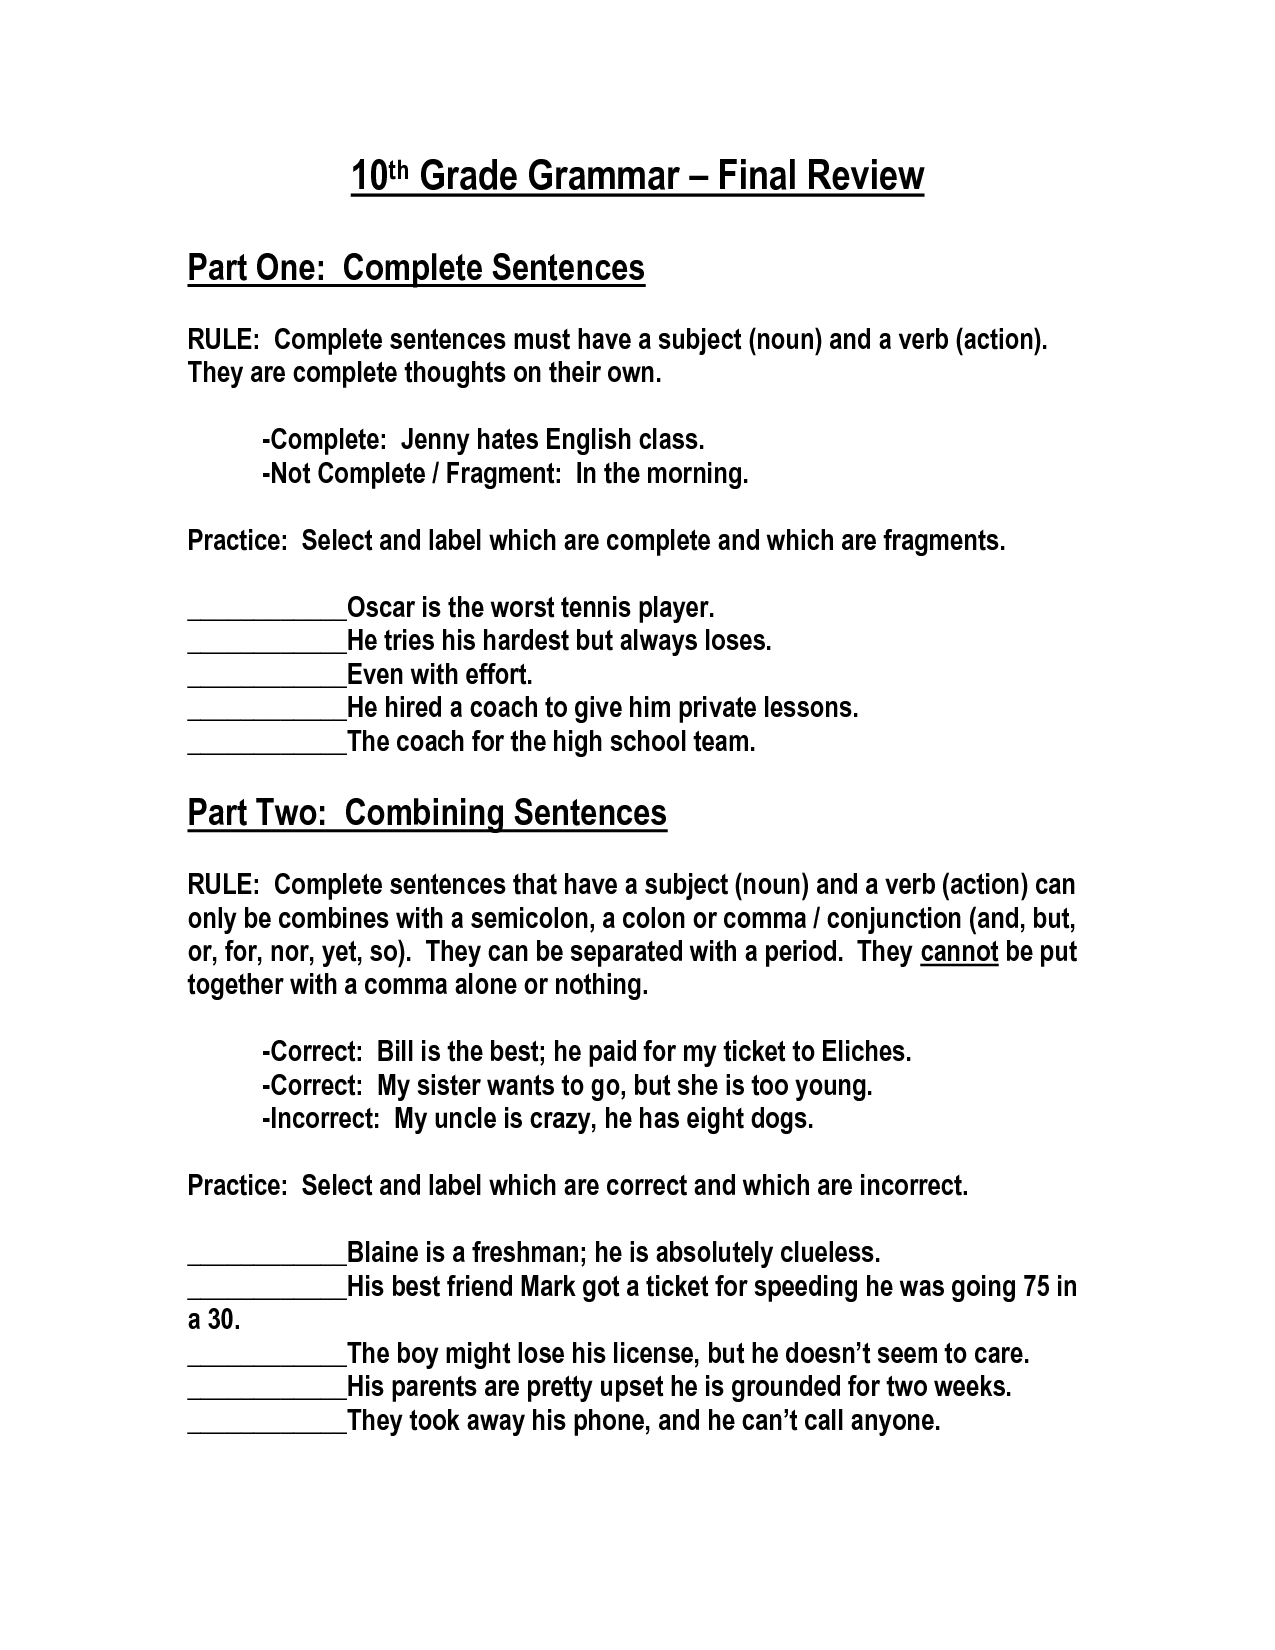 16-best-images-of-fall-worksheets-for-5th-grade-5th-grade-halloween-math-worksheets-halloween